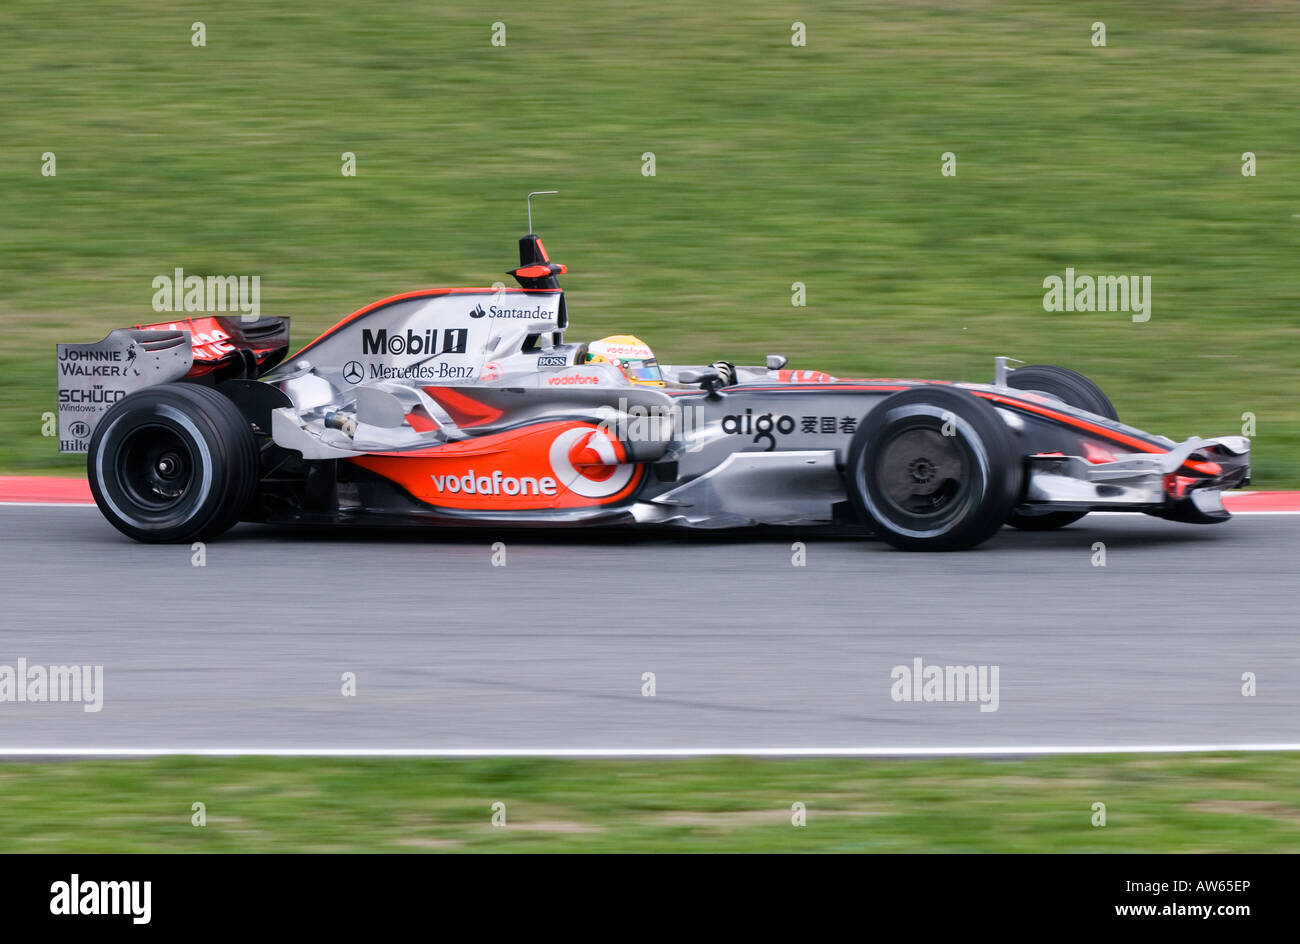 Lewis Hamilton GBR in the McLaren Mercedes MP4 23 racecar during Formula 1  testing sessions on the Circuit de Catalunya Stock Photo - Alamy